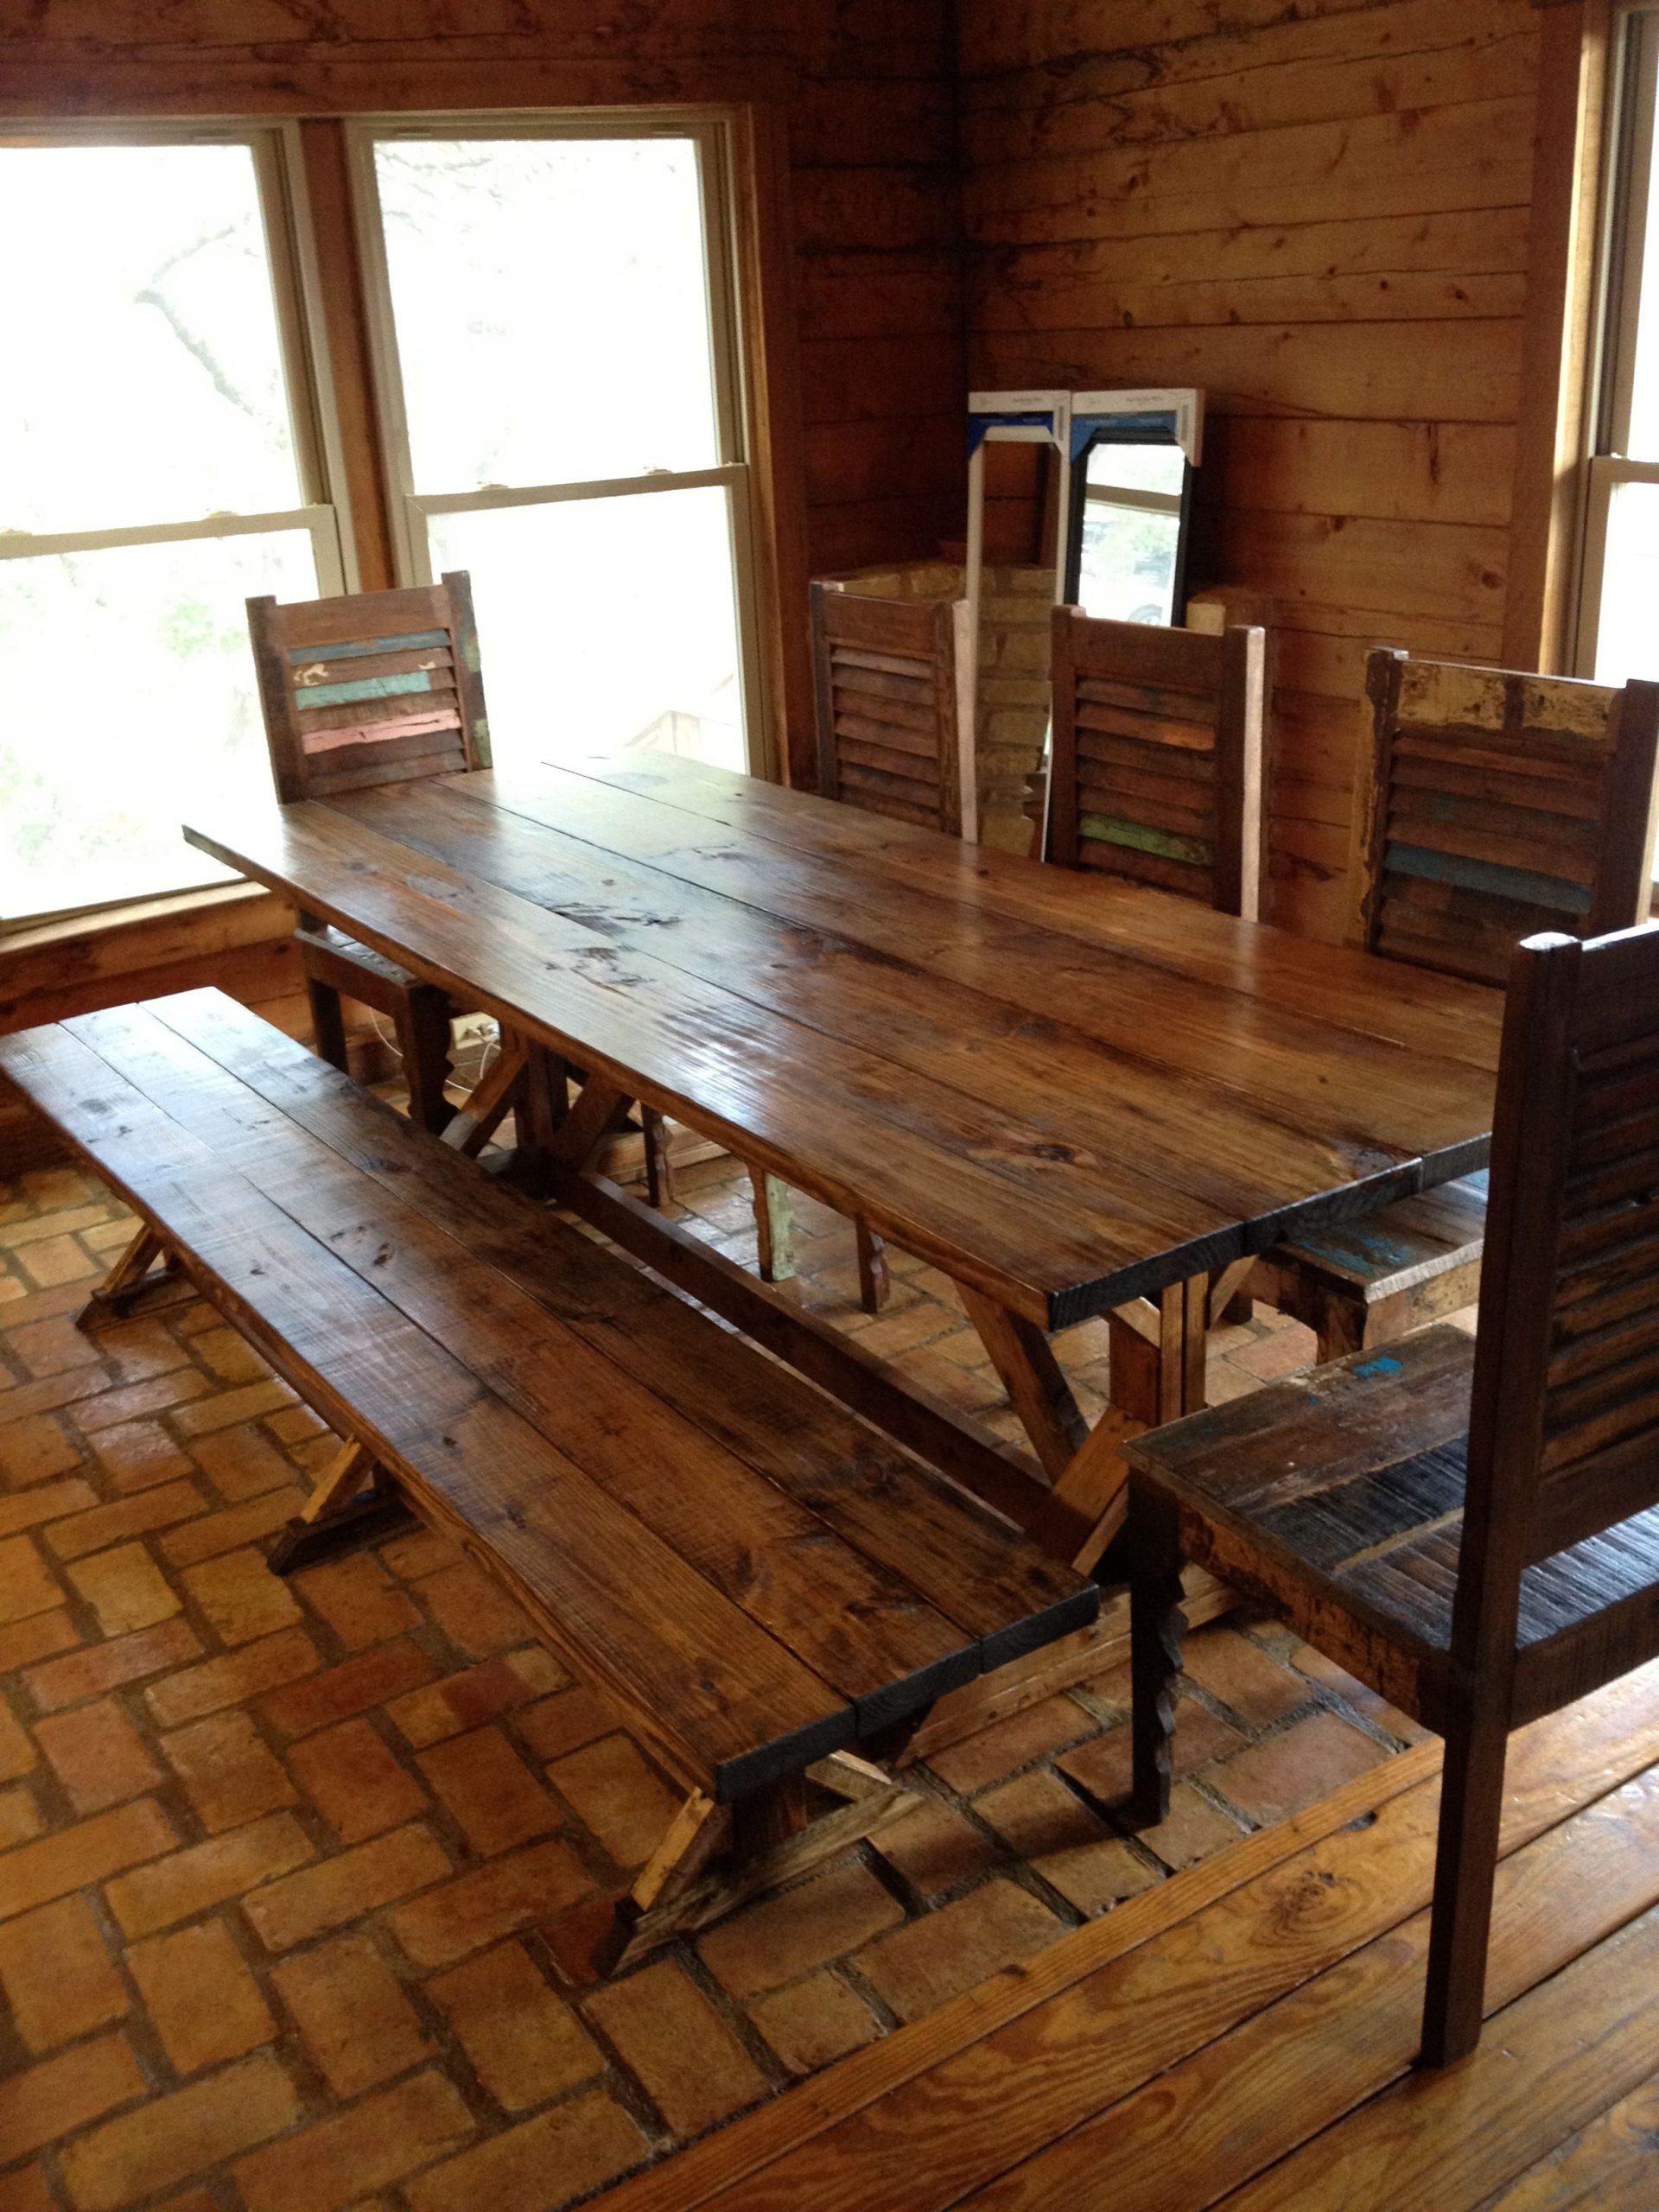 Rustic Dining Table Picnic Style With Bench Seating And regarding dimensions 2448 X 3264